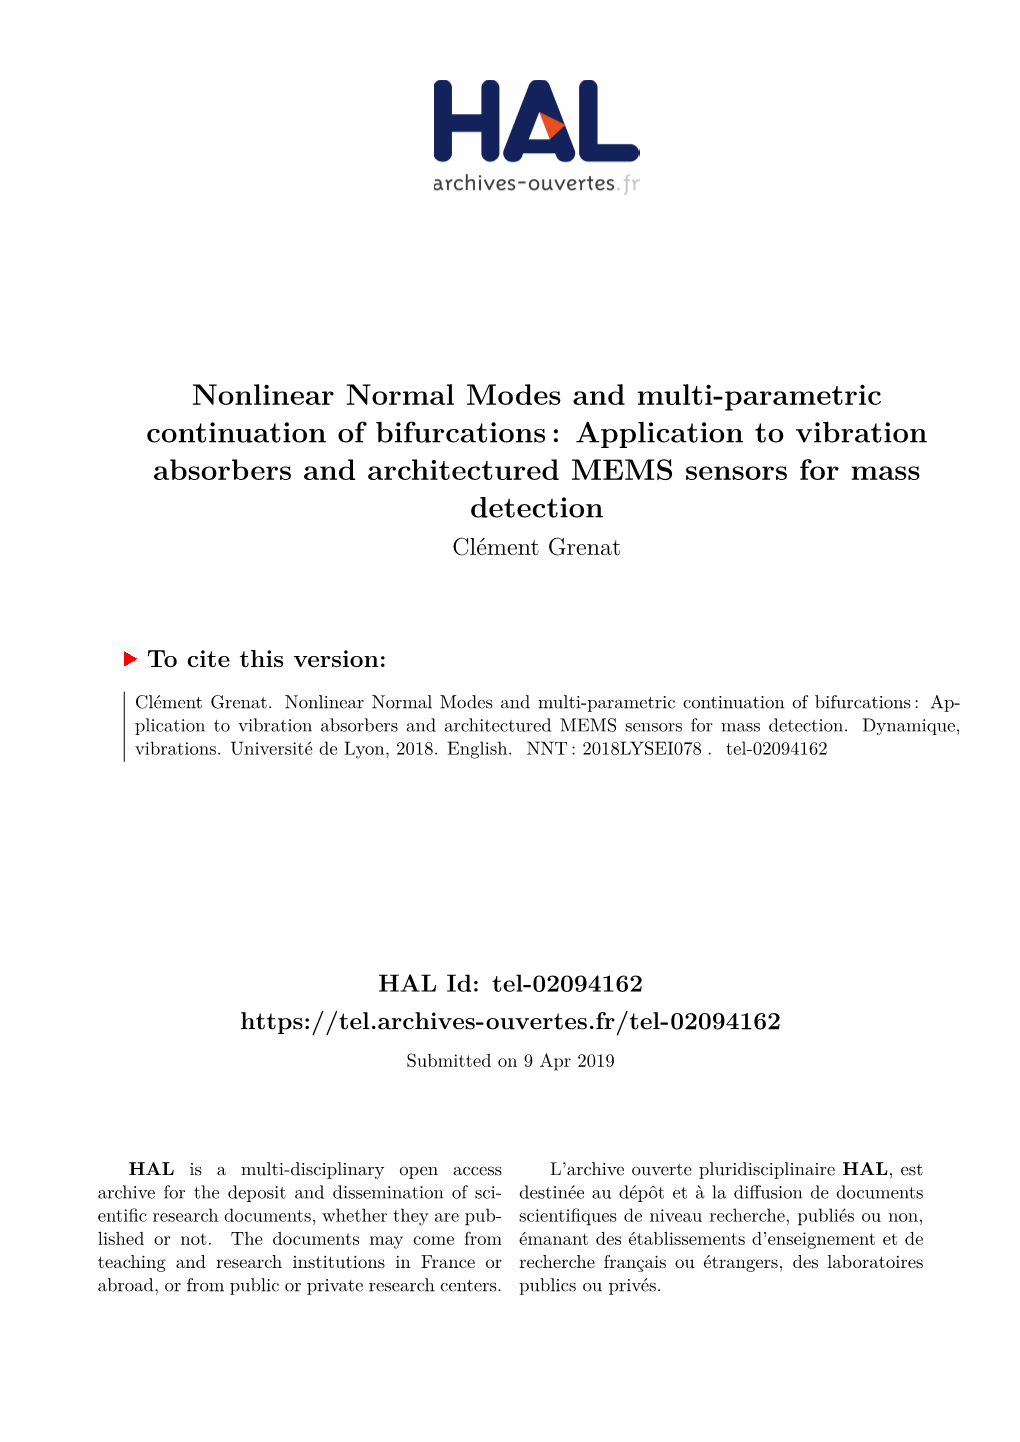 Nonlinear Normal Modes and Multi-Parametric Continuation Of